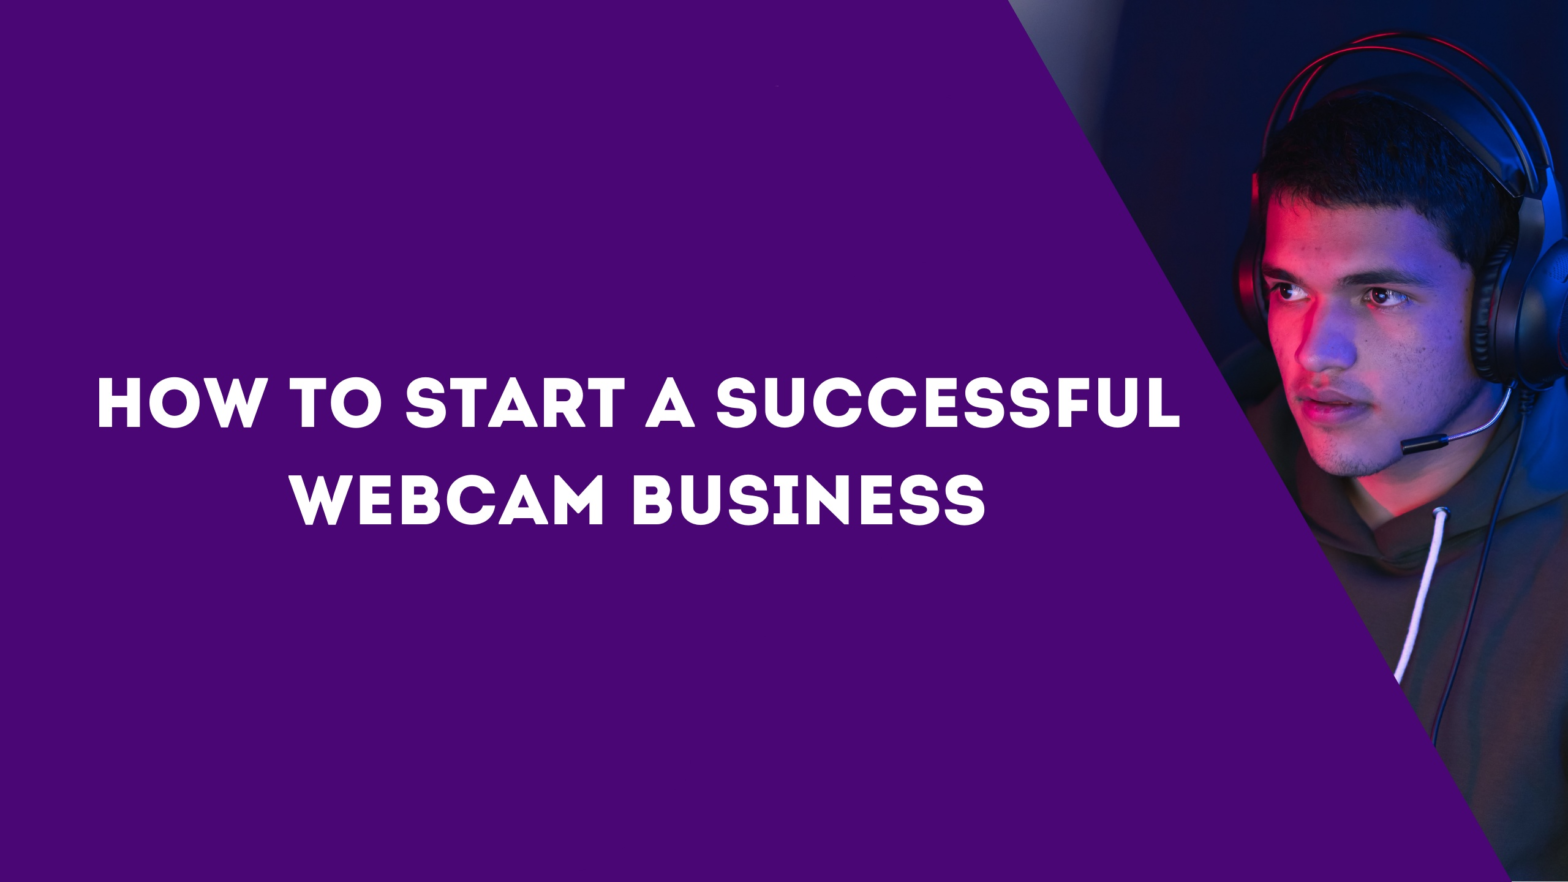 How to start a successful webcam business